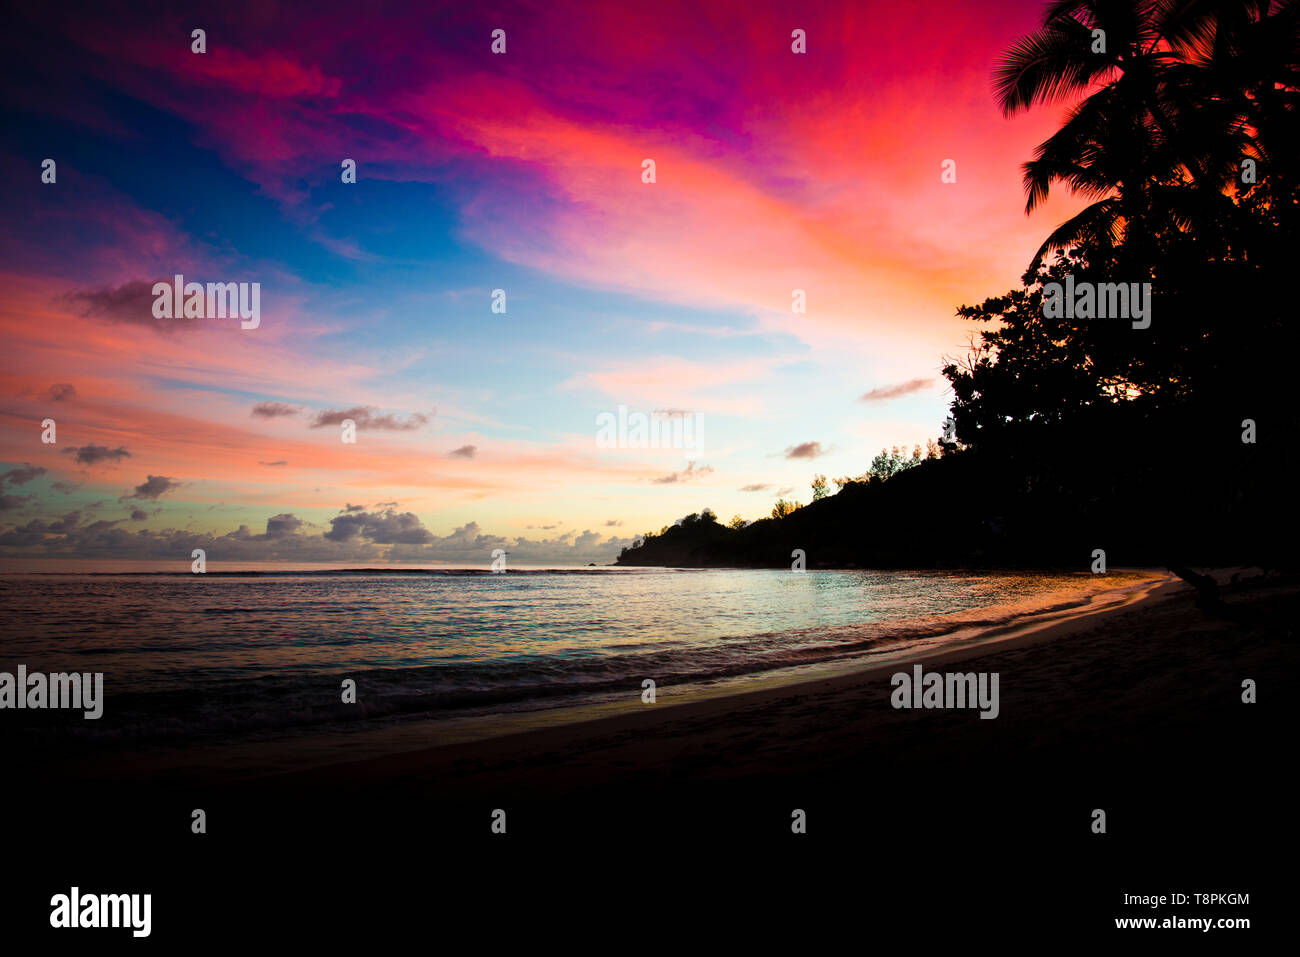 beautiful sunset from the shoreline looking out to the ocean,Seychelles, Stock Photo